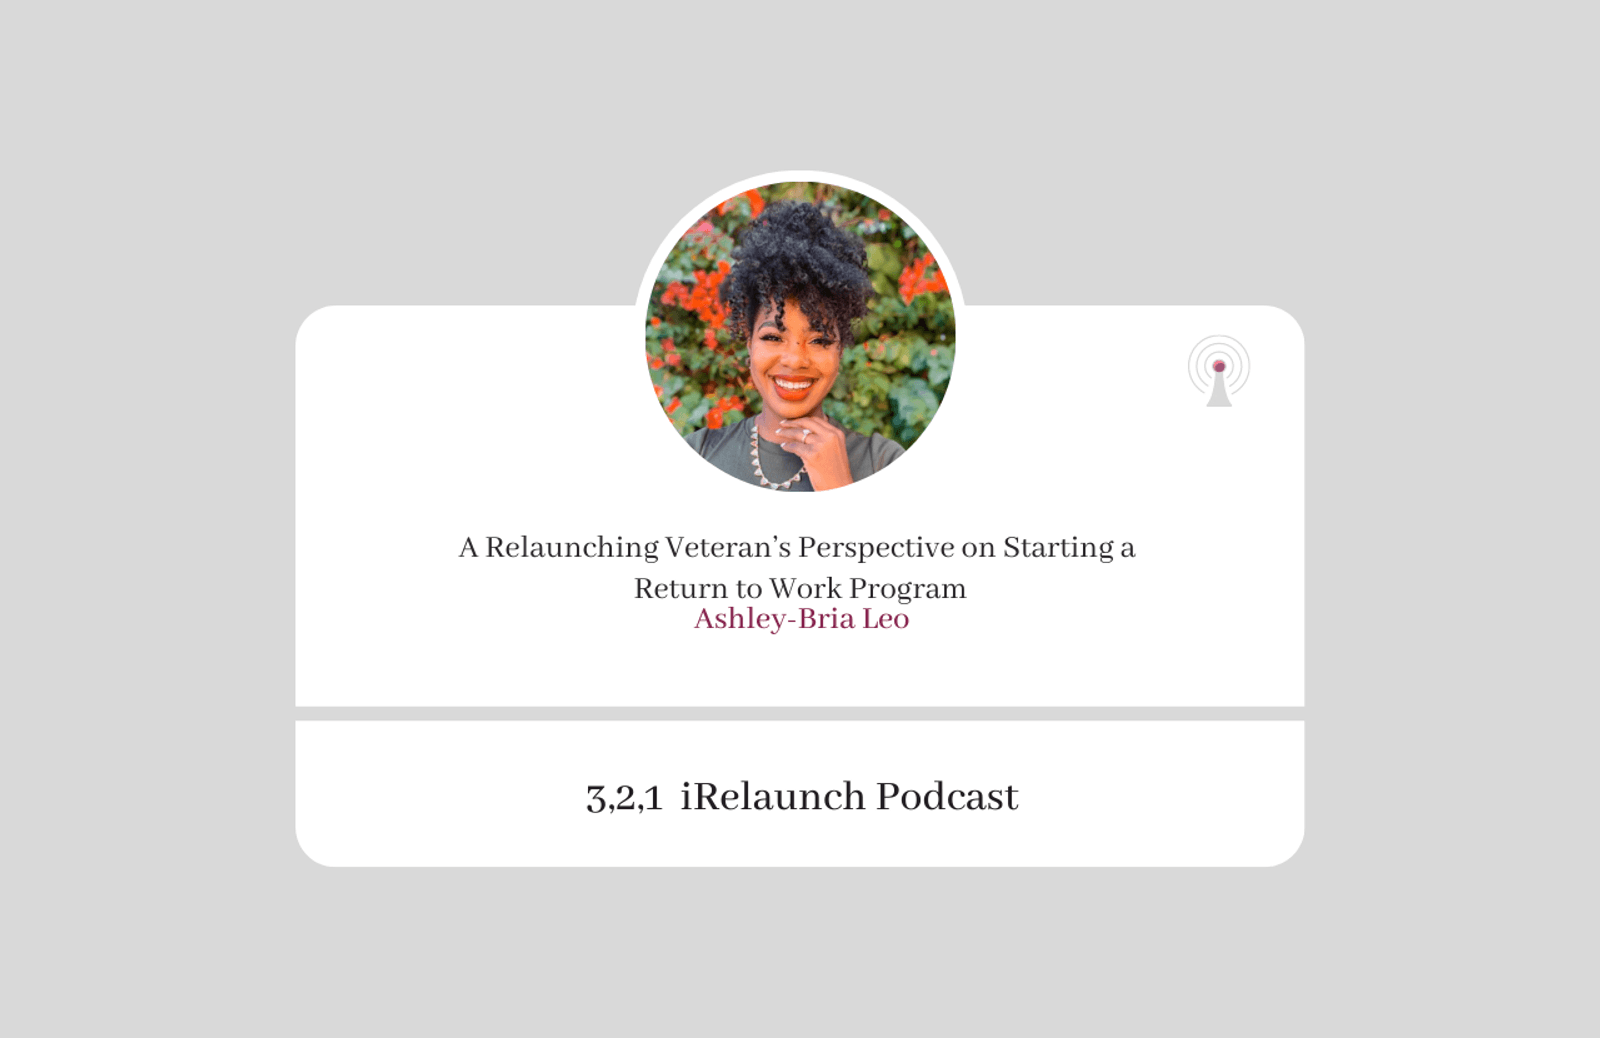 3, 2, 1 iRelaunch Podcast Thumbnail for Episode #164 with Ashley Bria Leo's headshot. The episode's title is: "A Relaunching Veteran’s Perspective on Starting a Return to Work Program."